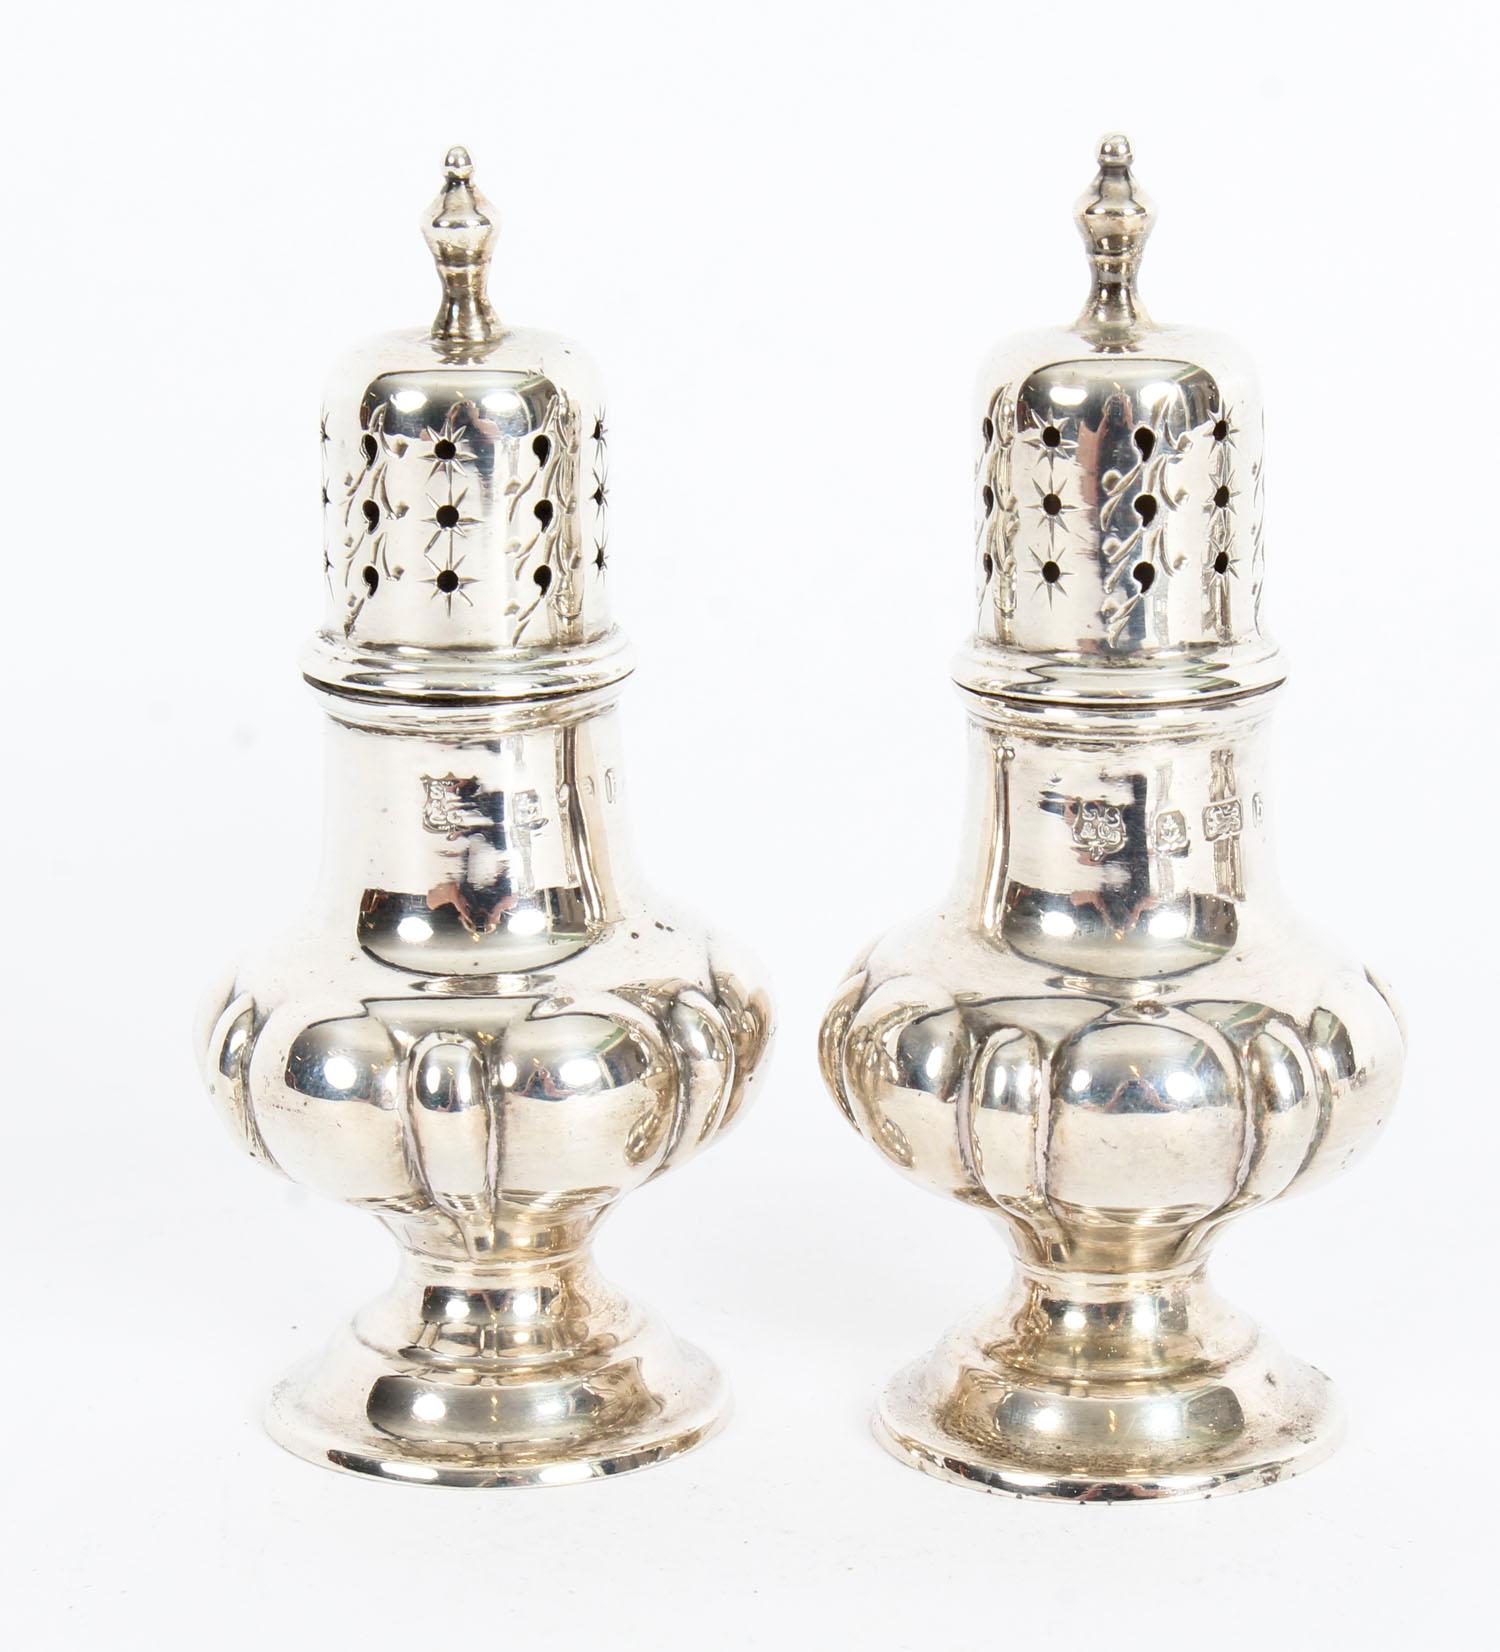 Early 20th Century Antique Edwardian Cased Sterling Silver Cruet Set by S. W. Smith & Co., 1901